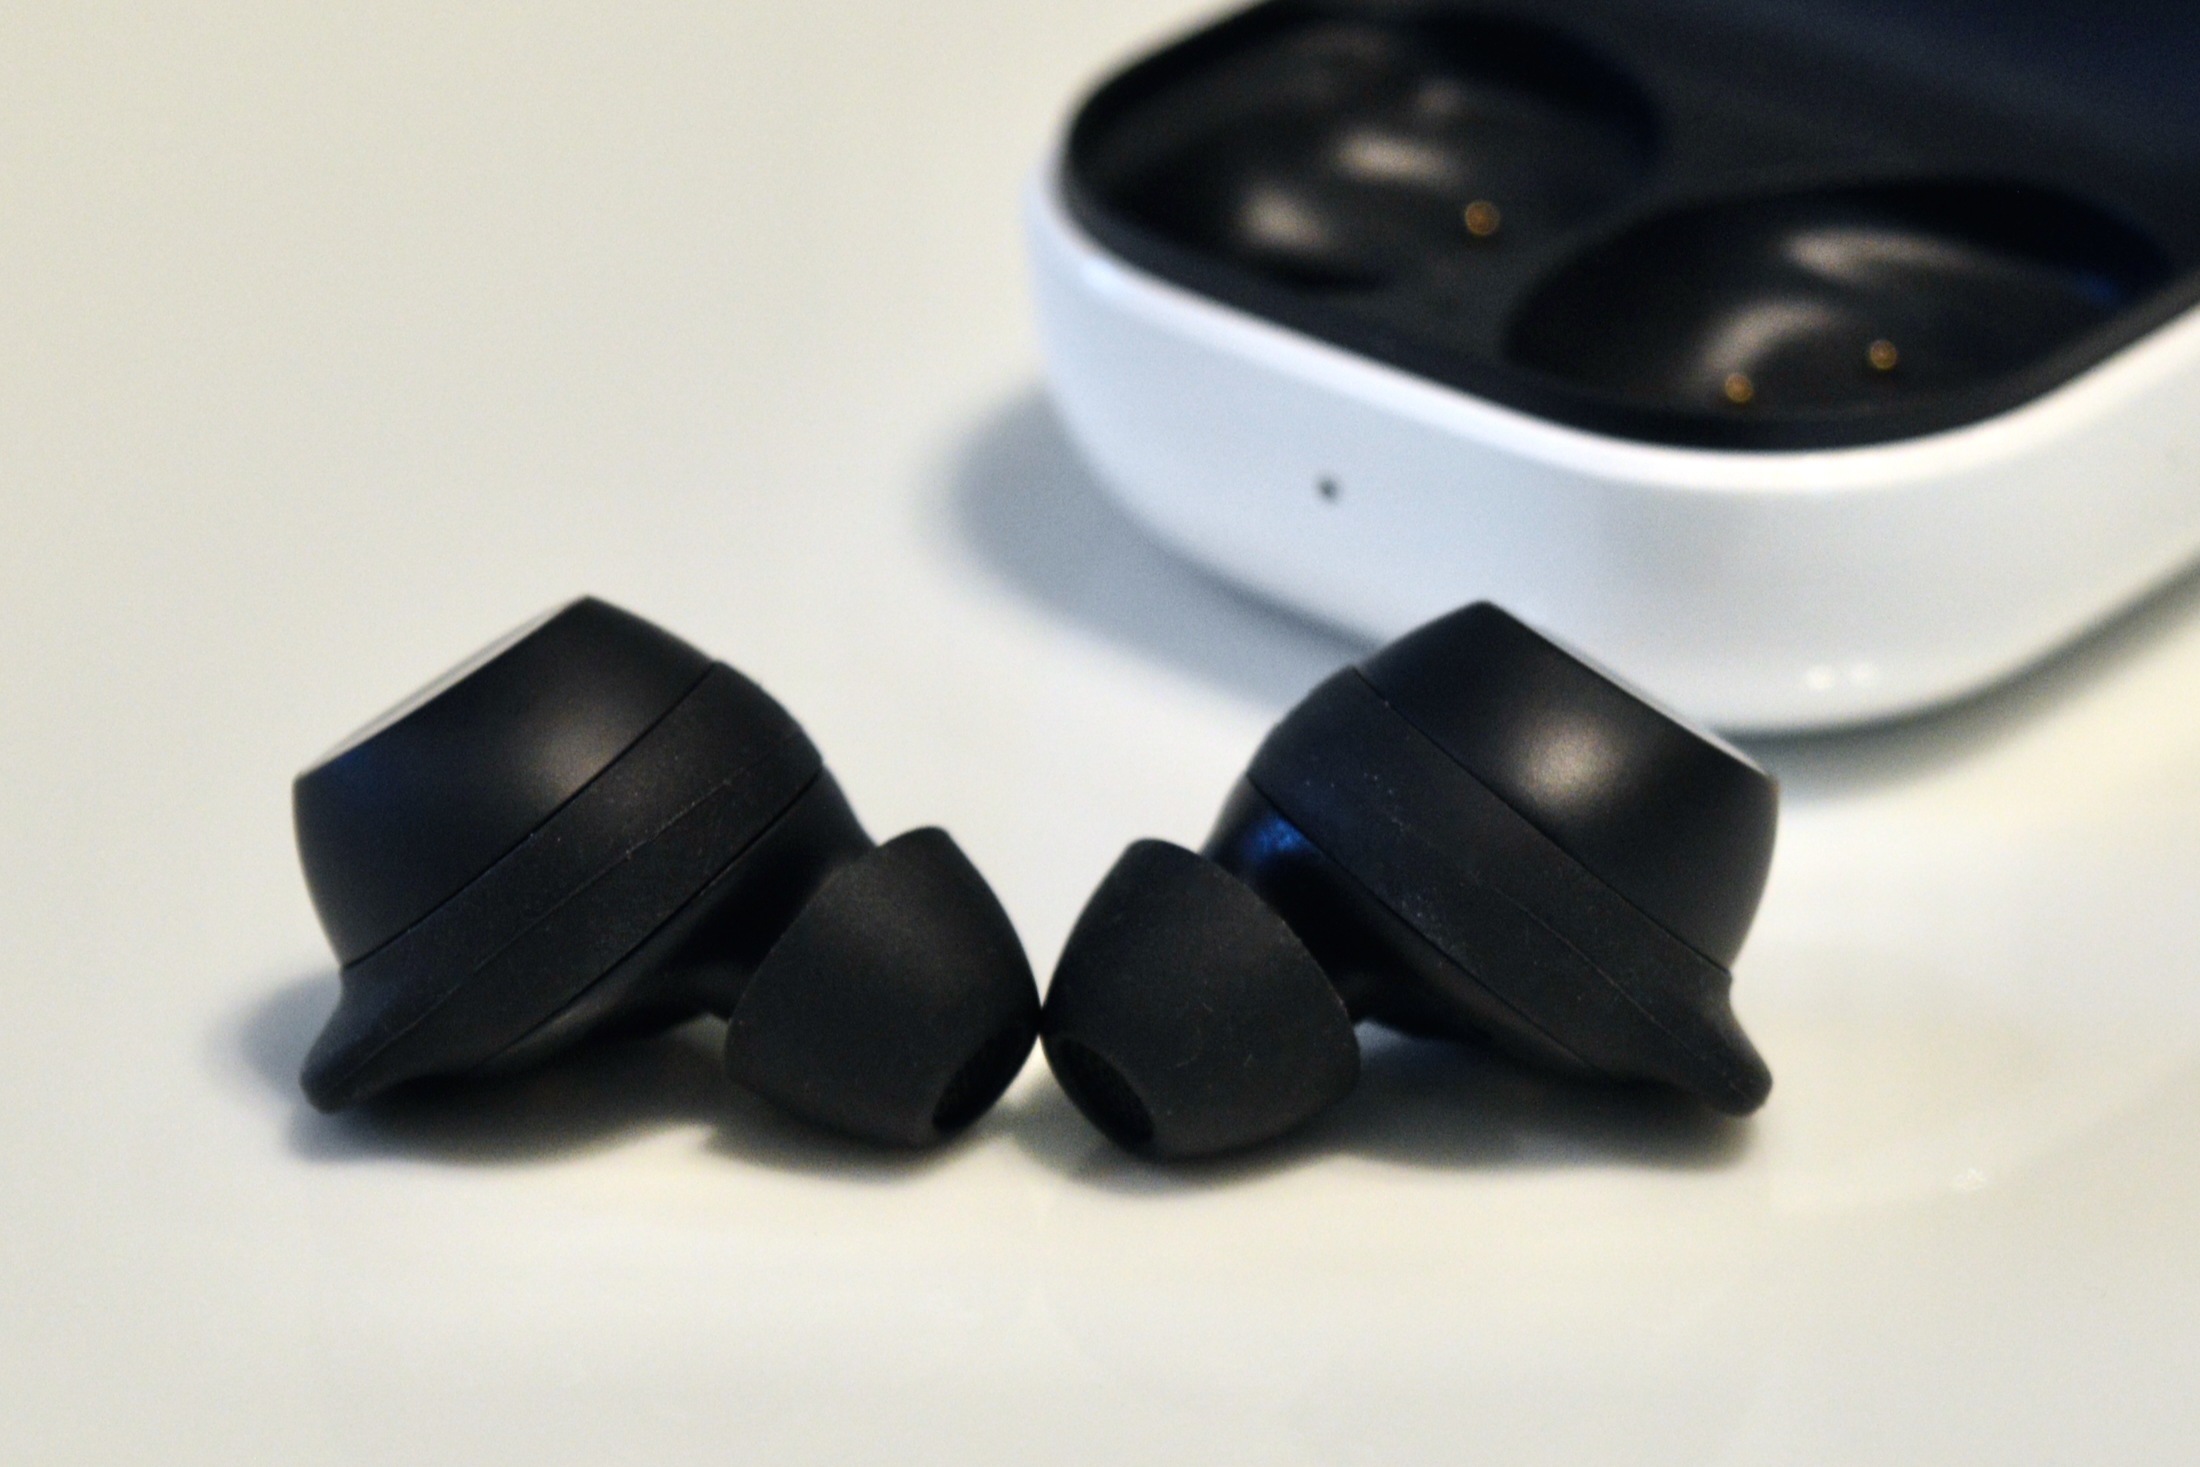 Samsung Galaxy Buds FE review: sometimes the fit is everything - The Verge